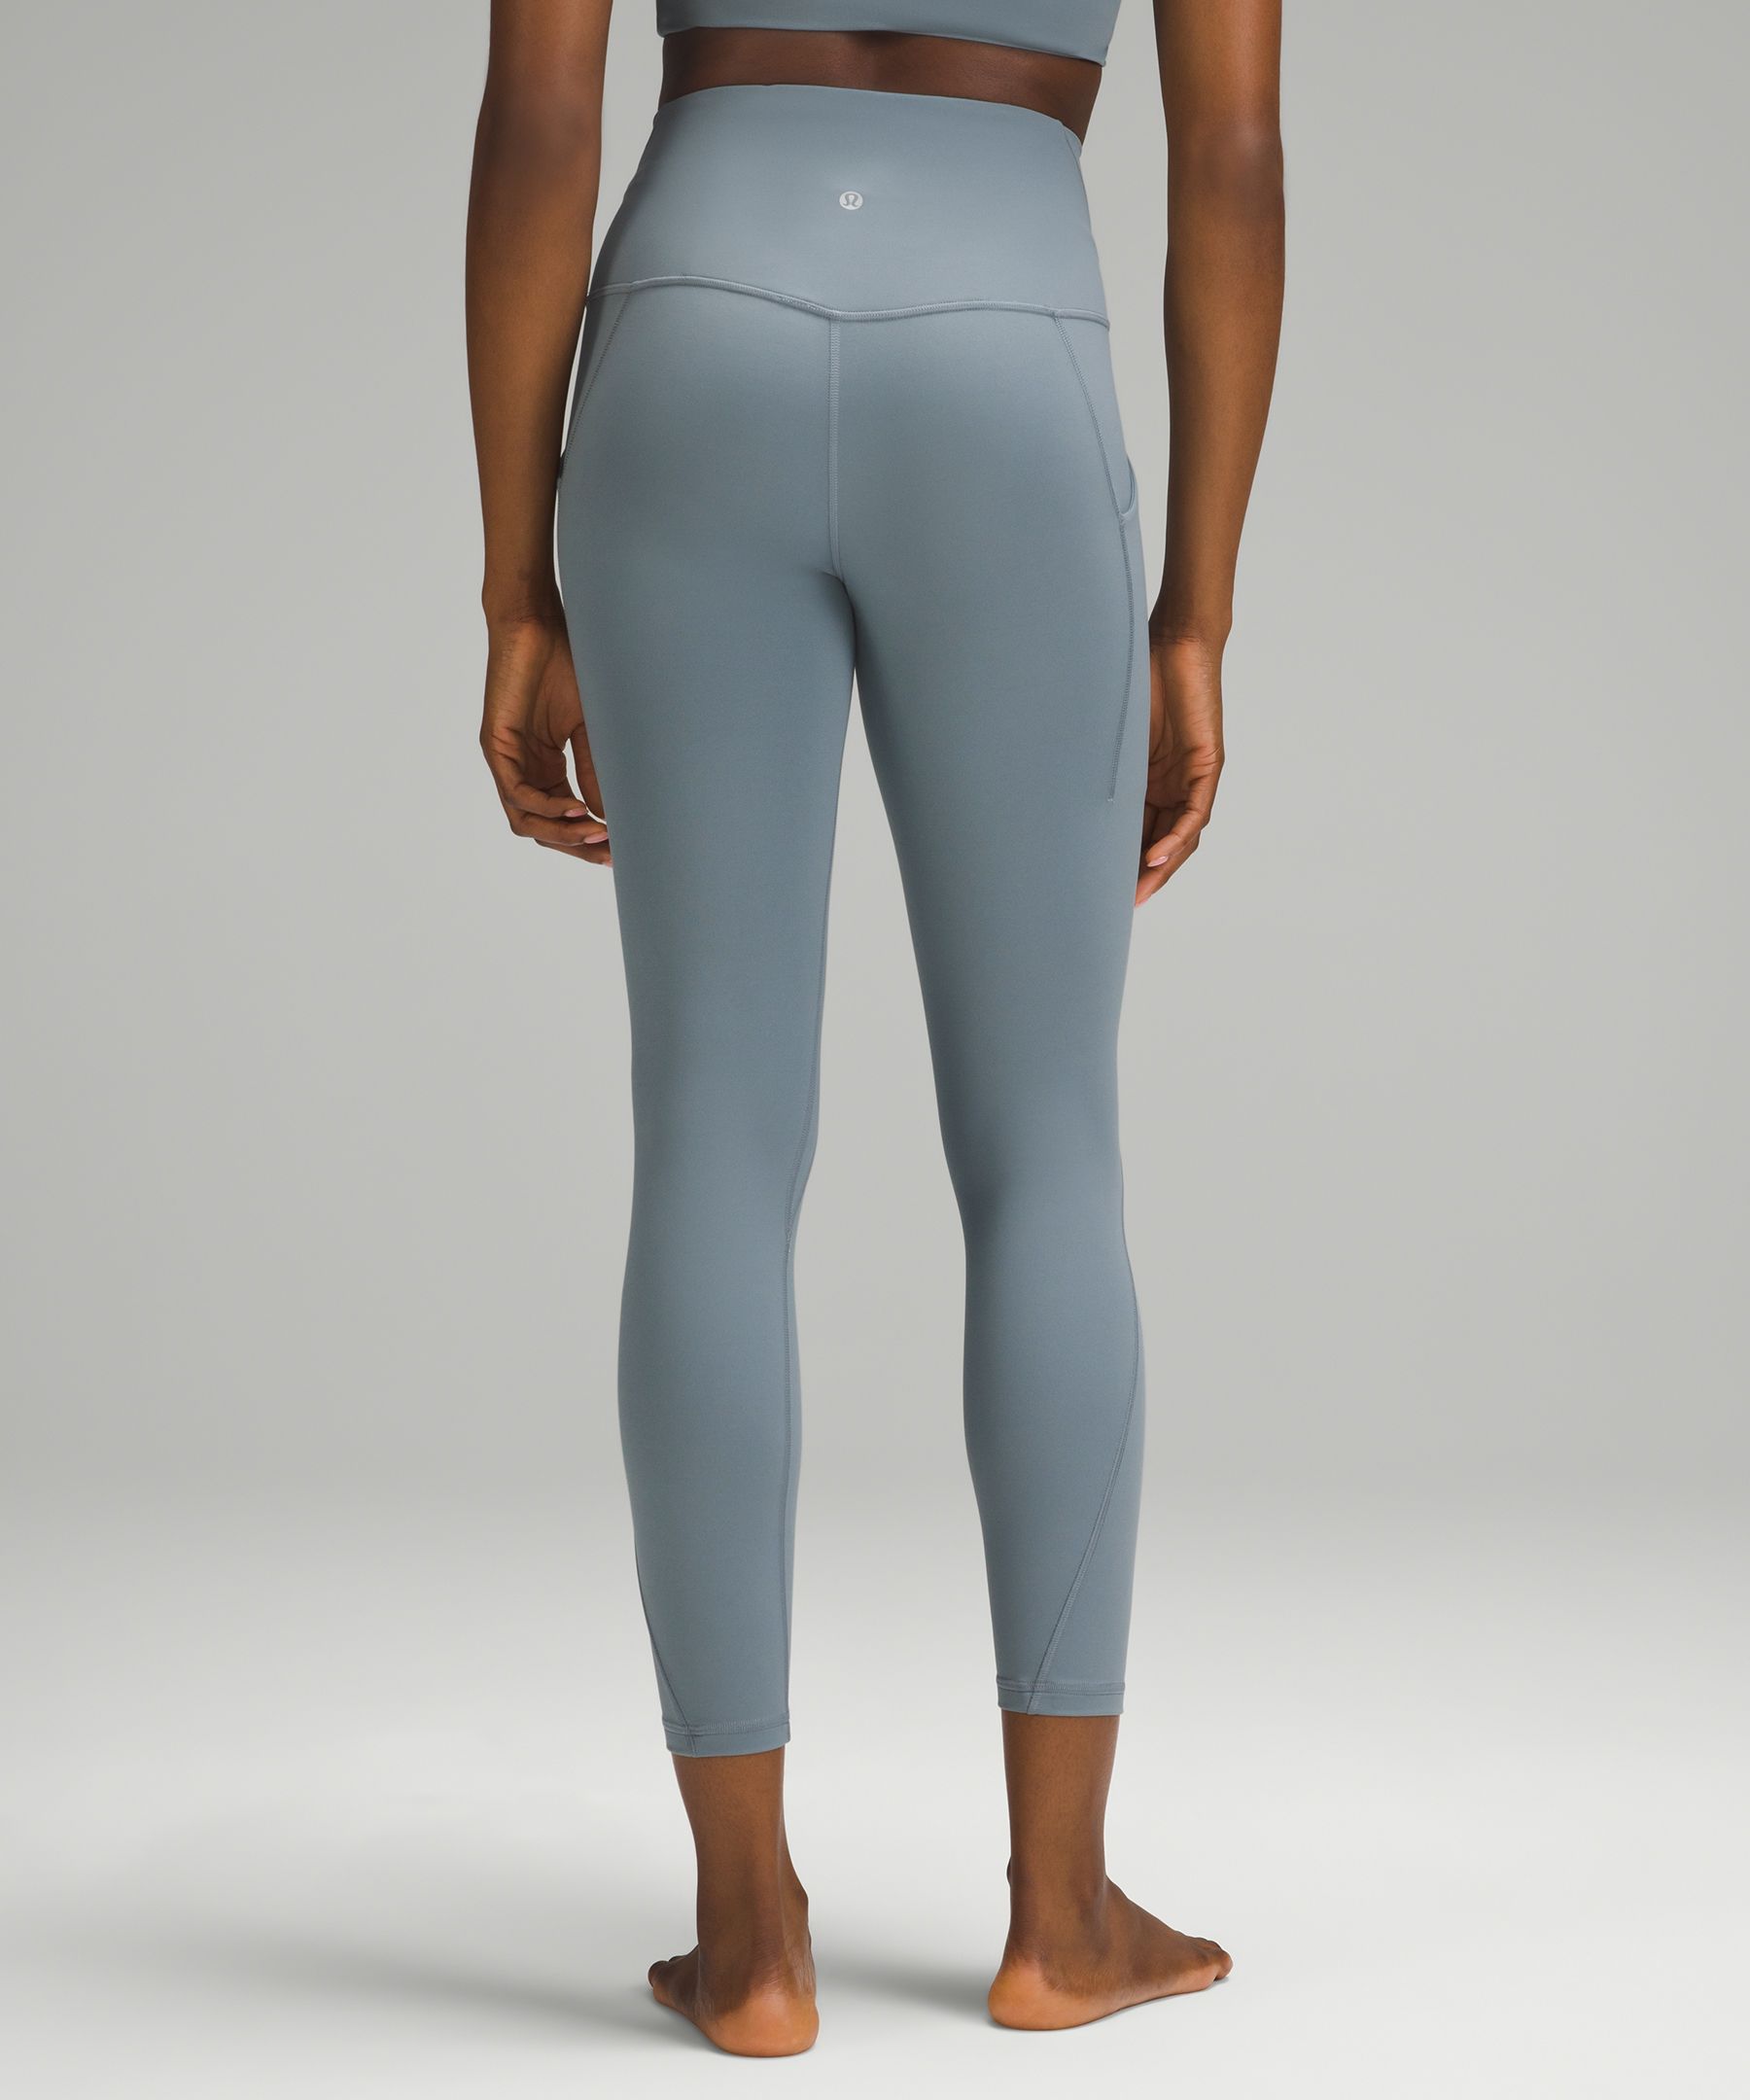 Lululemon Align™ High-Rise Pant with Pockets 25, Women's Pants